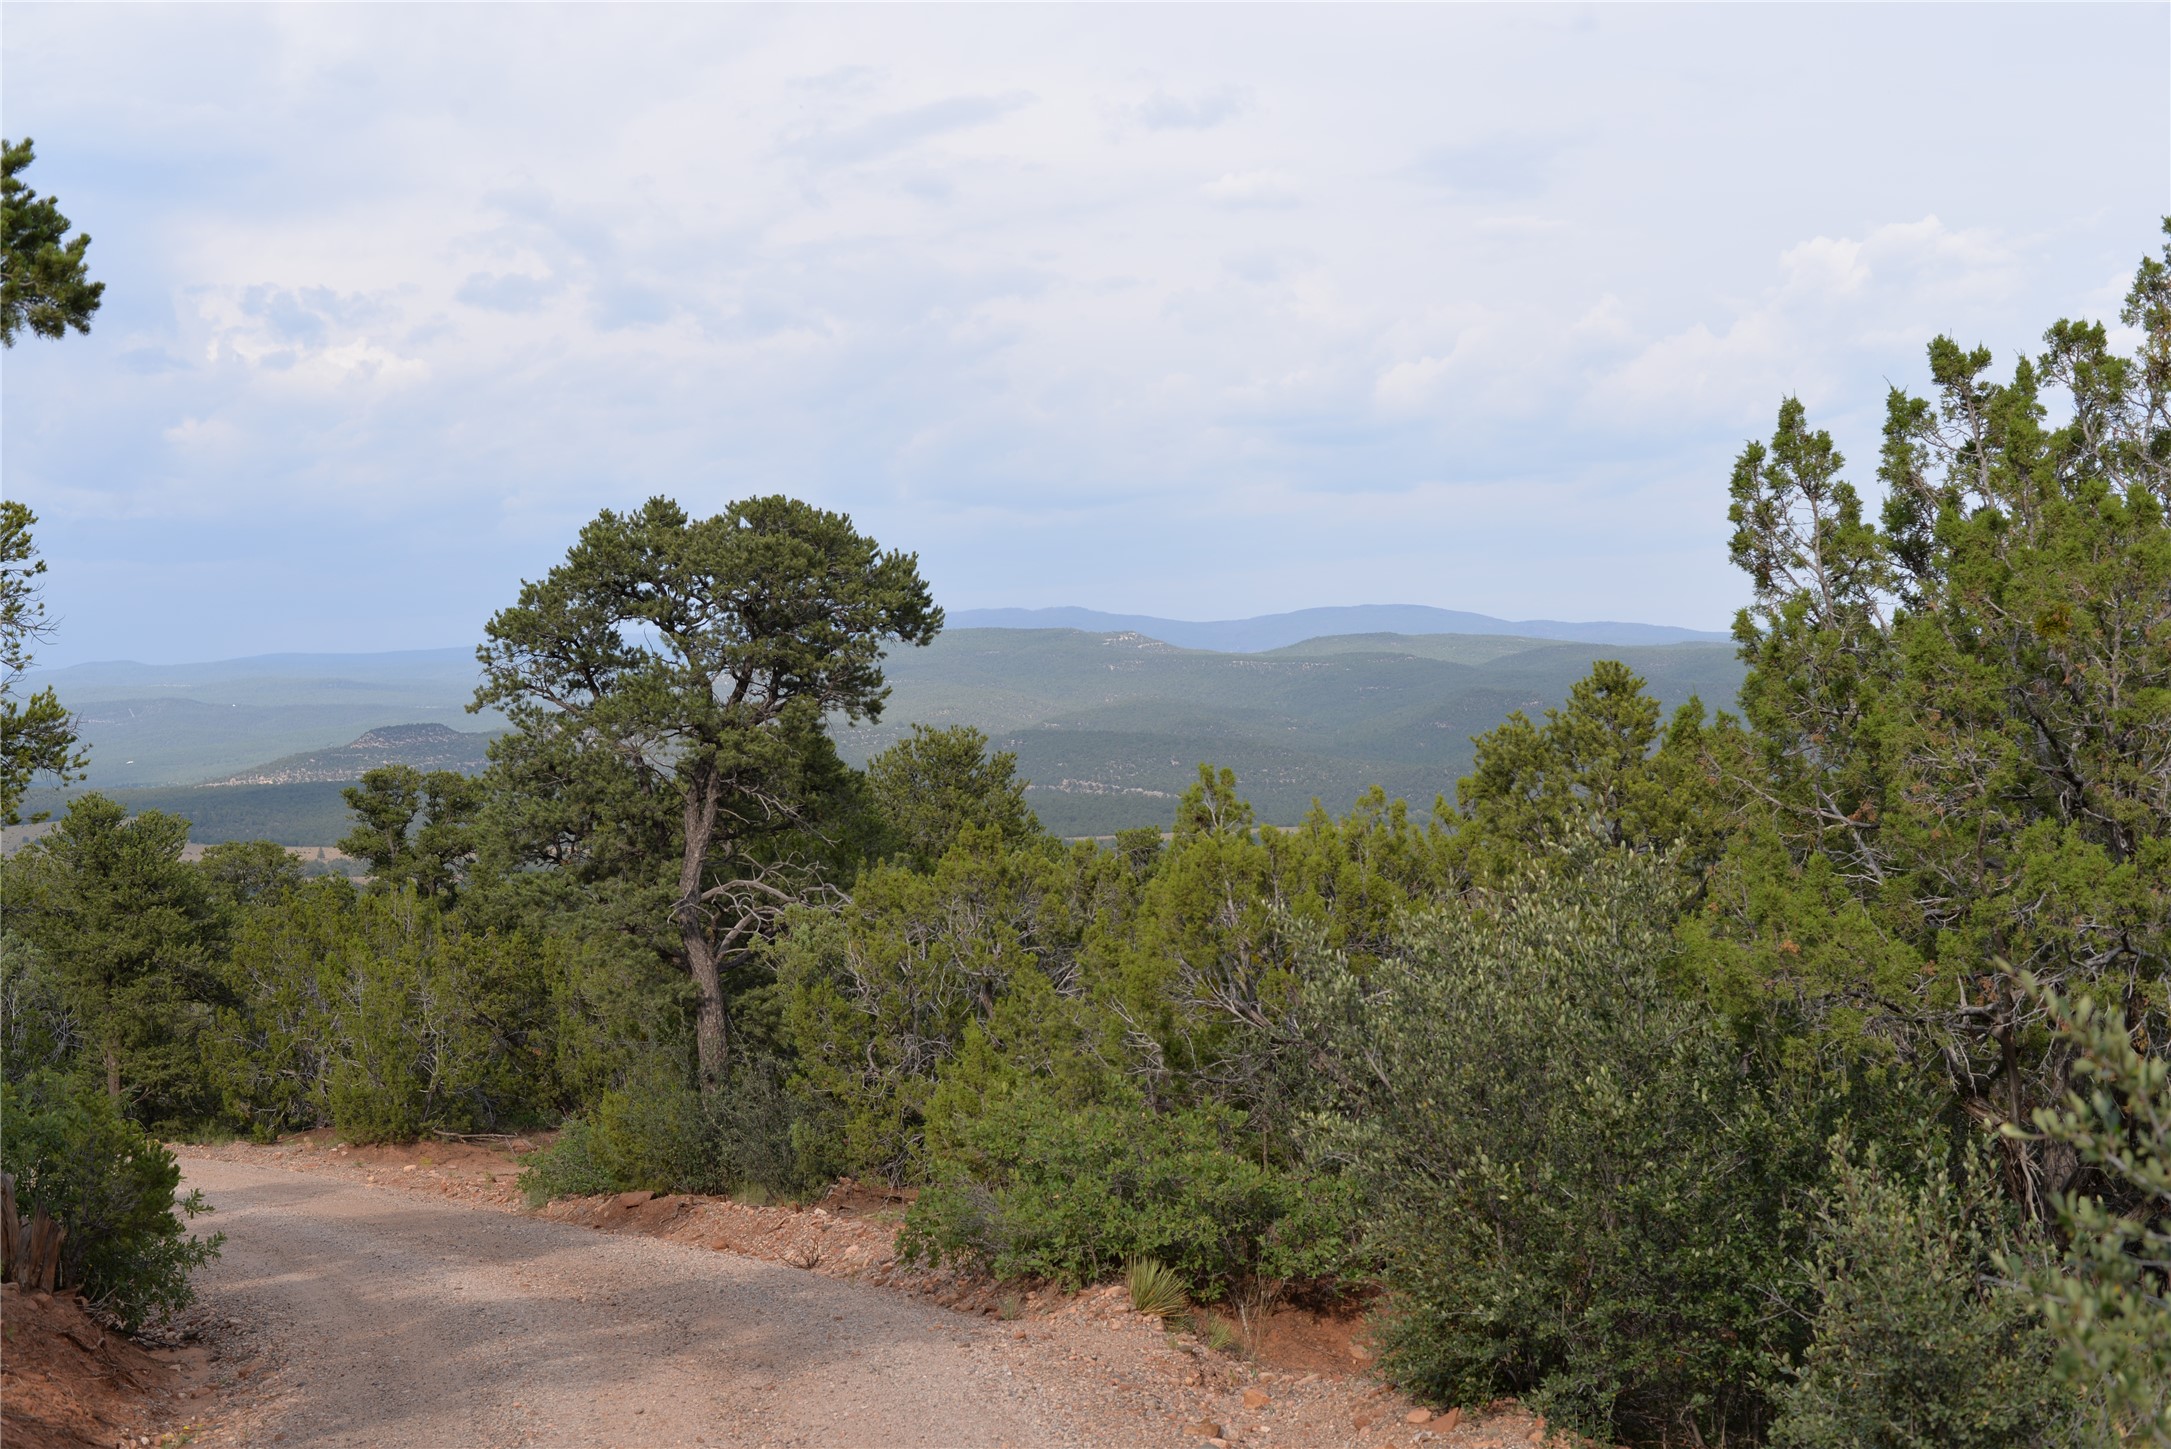 View of the Pecos Valley from the property.